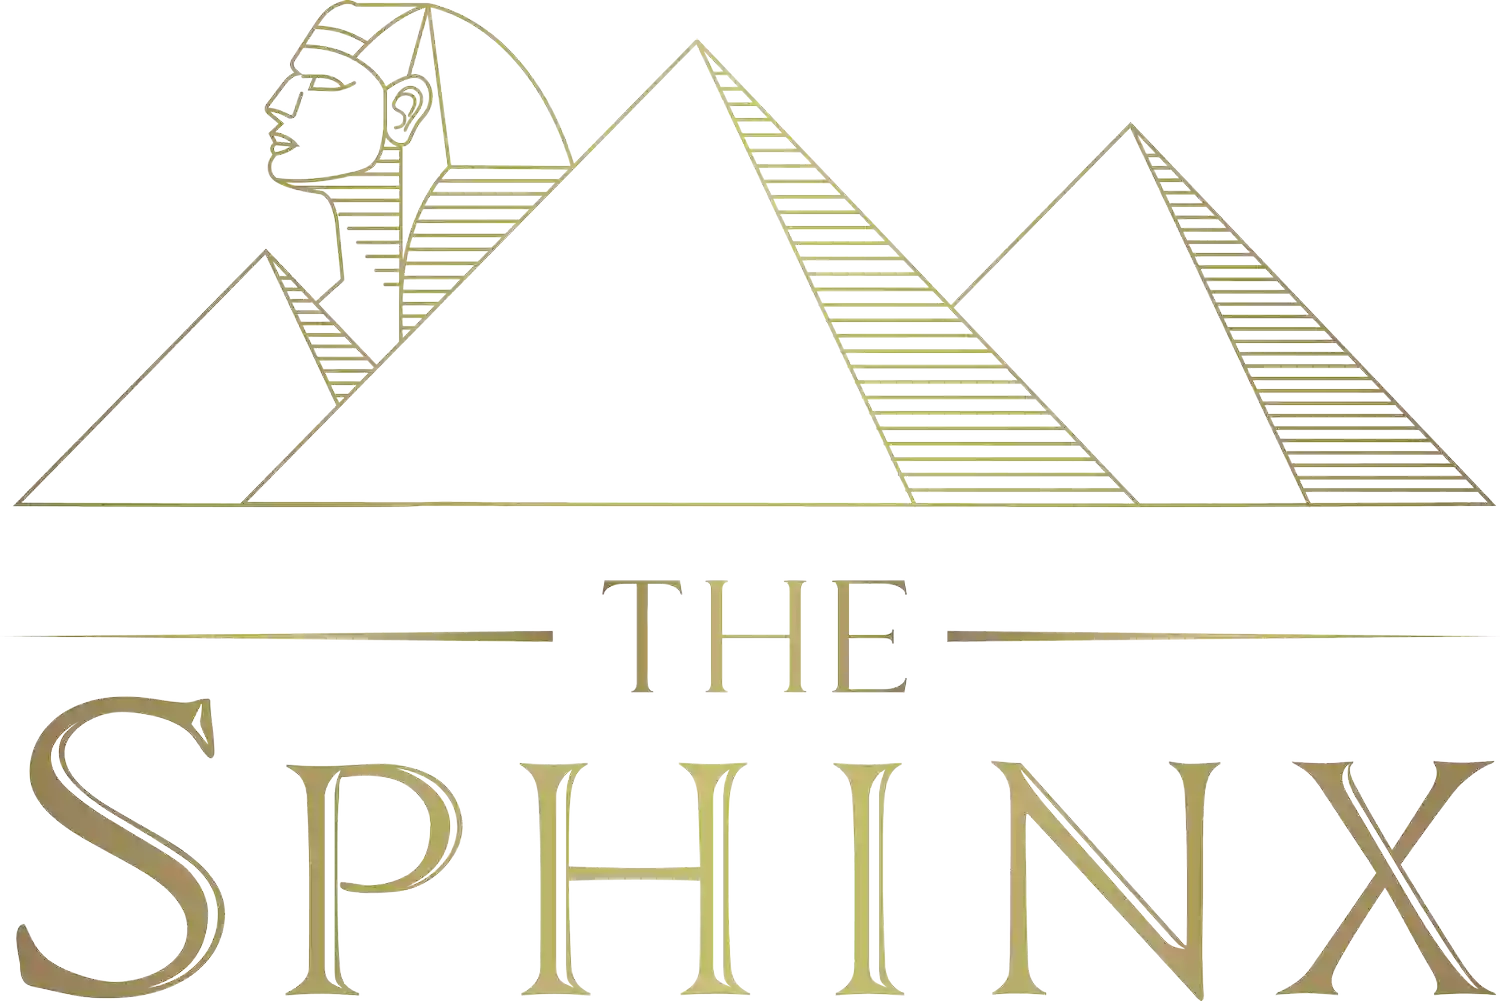 The Sphinx Hotel